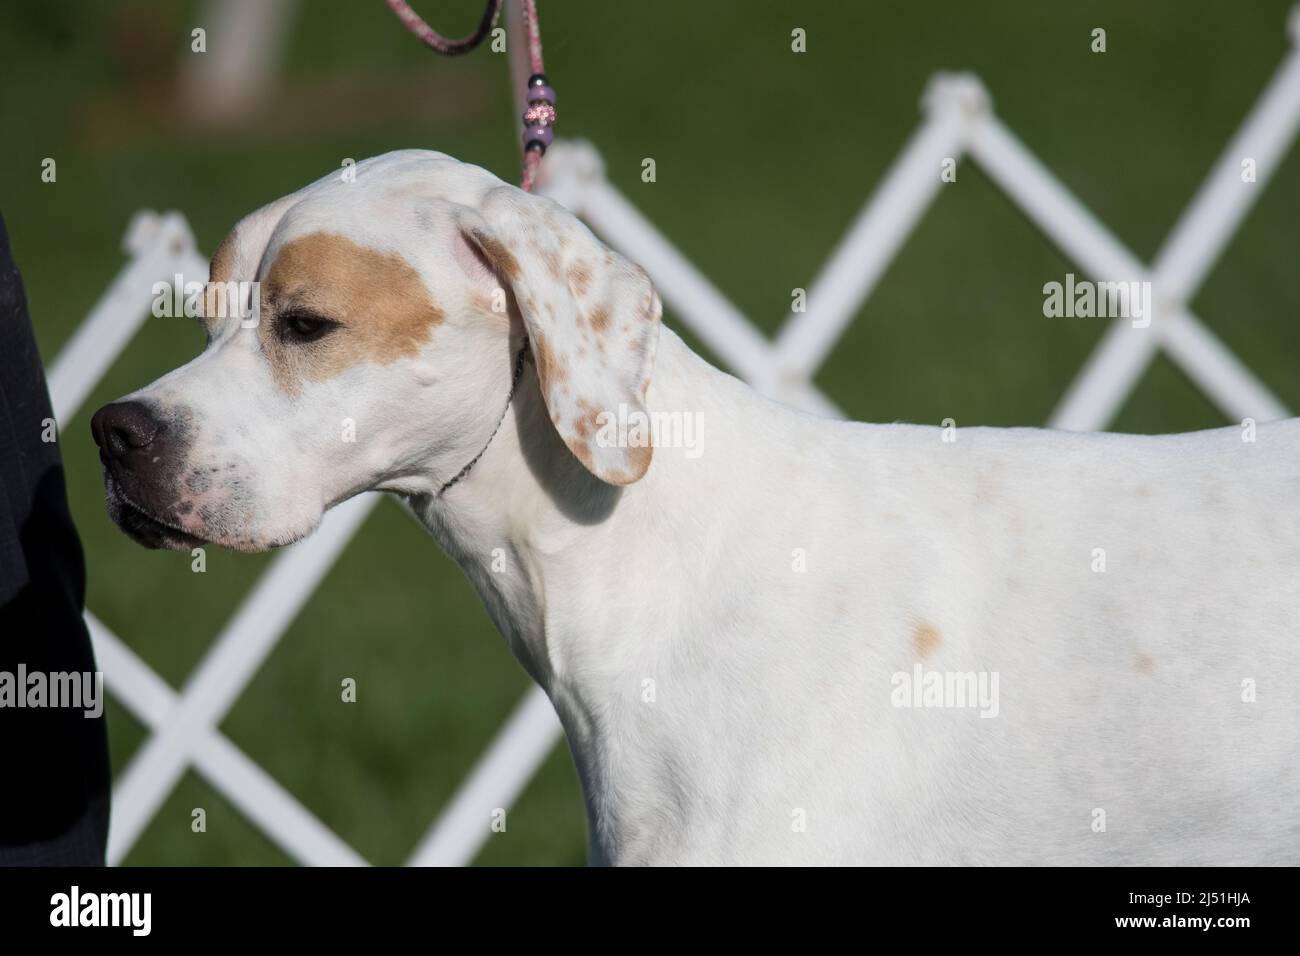 Pointer dog in the dog show ring with a close up view Stock Photo